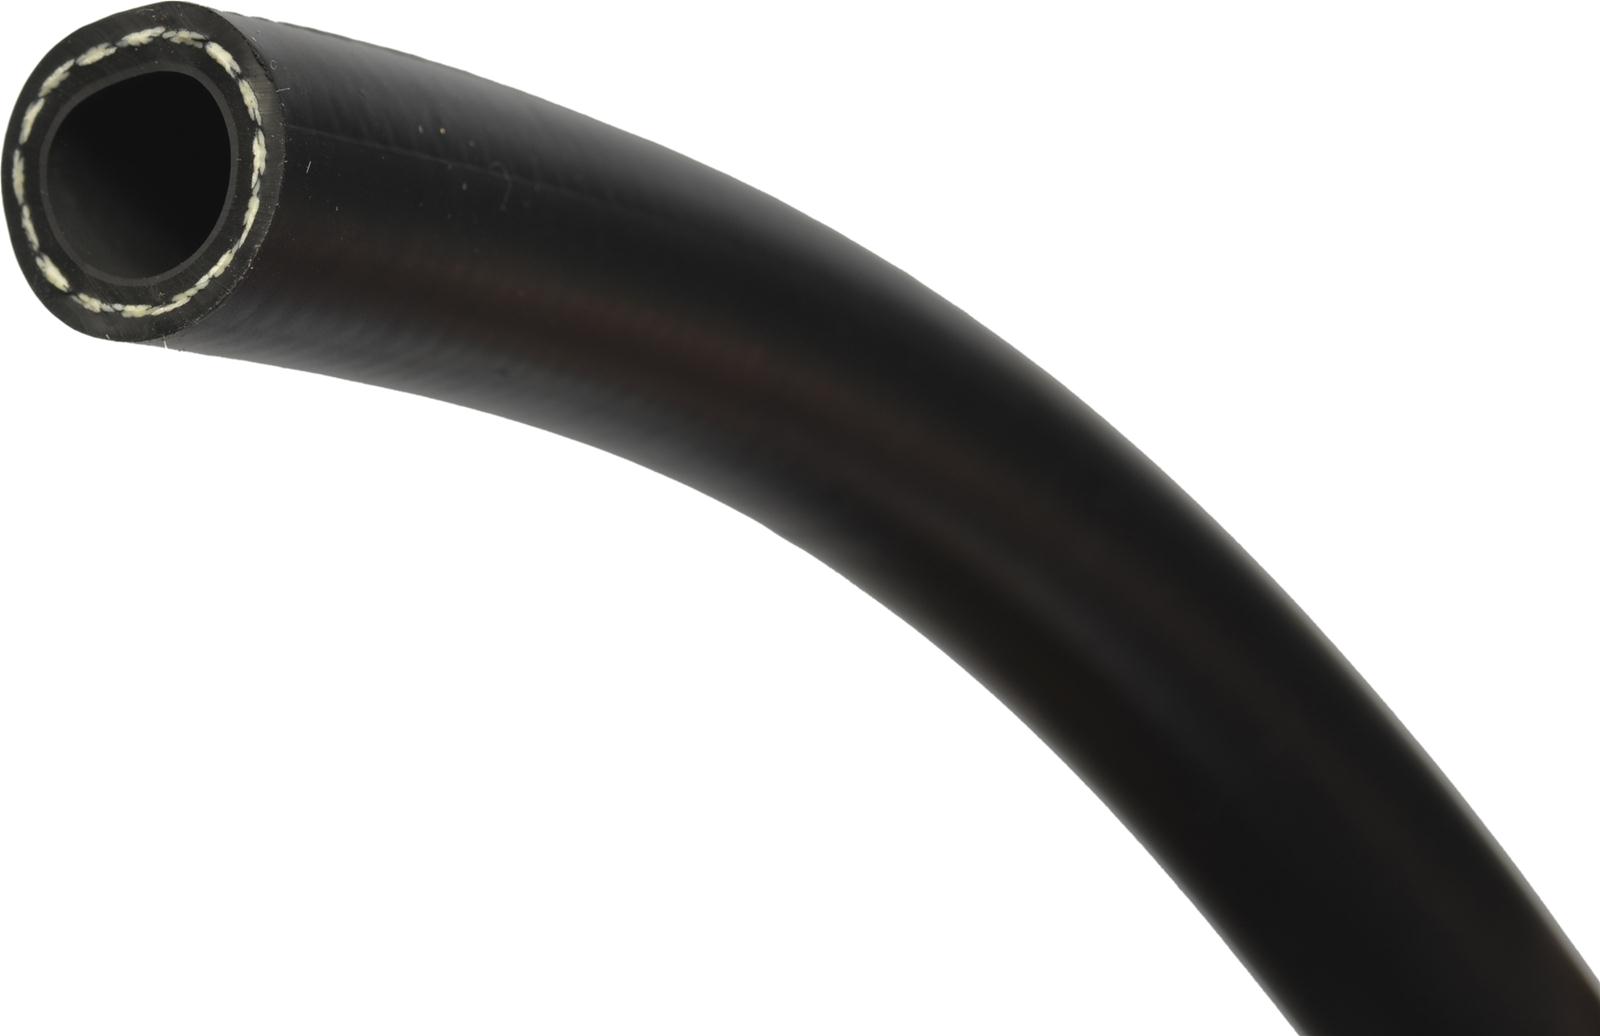 Buyer's Guide: How to Pick the Best Flexible Fuel Hose for Your Vehicle